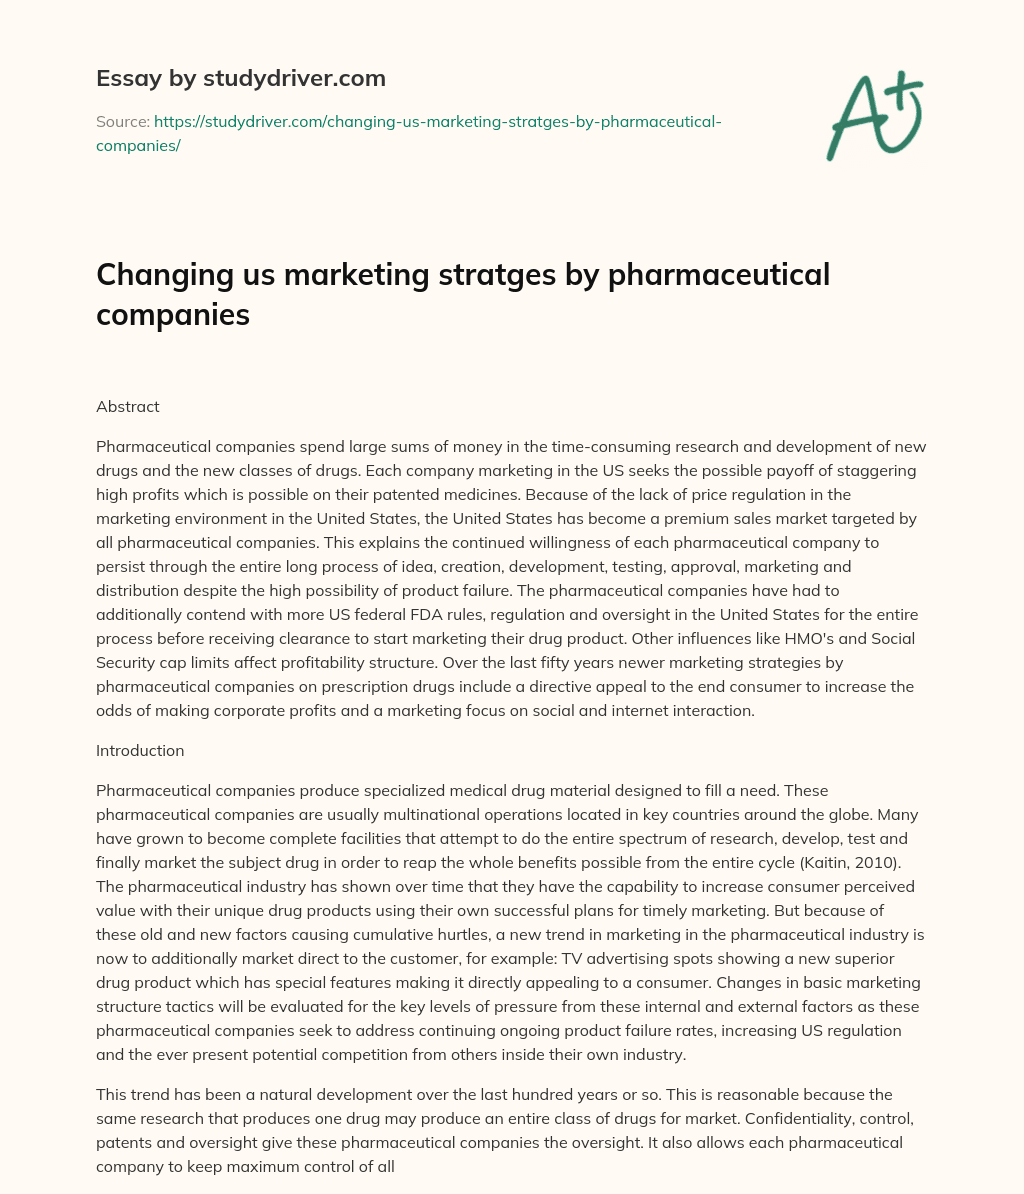 Changing Us Marketing Stratges by Pharmaceutical Companies essay